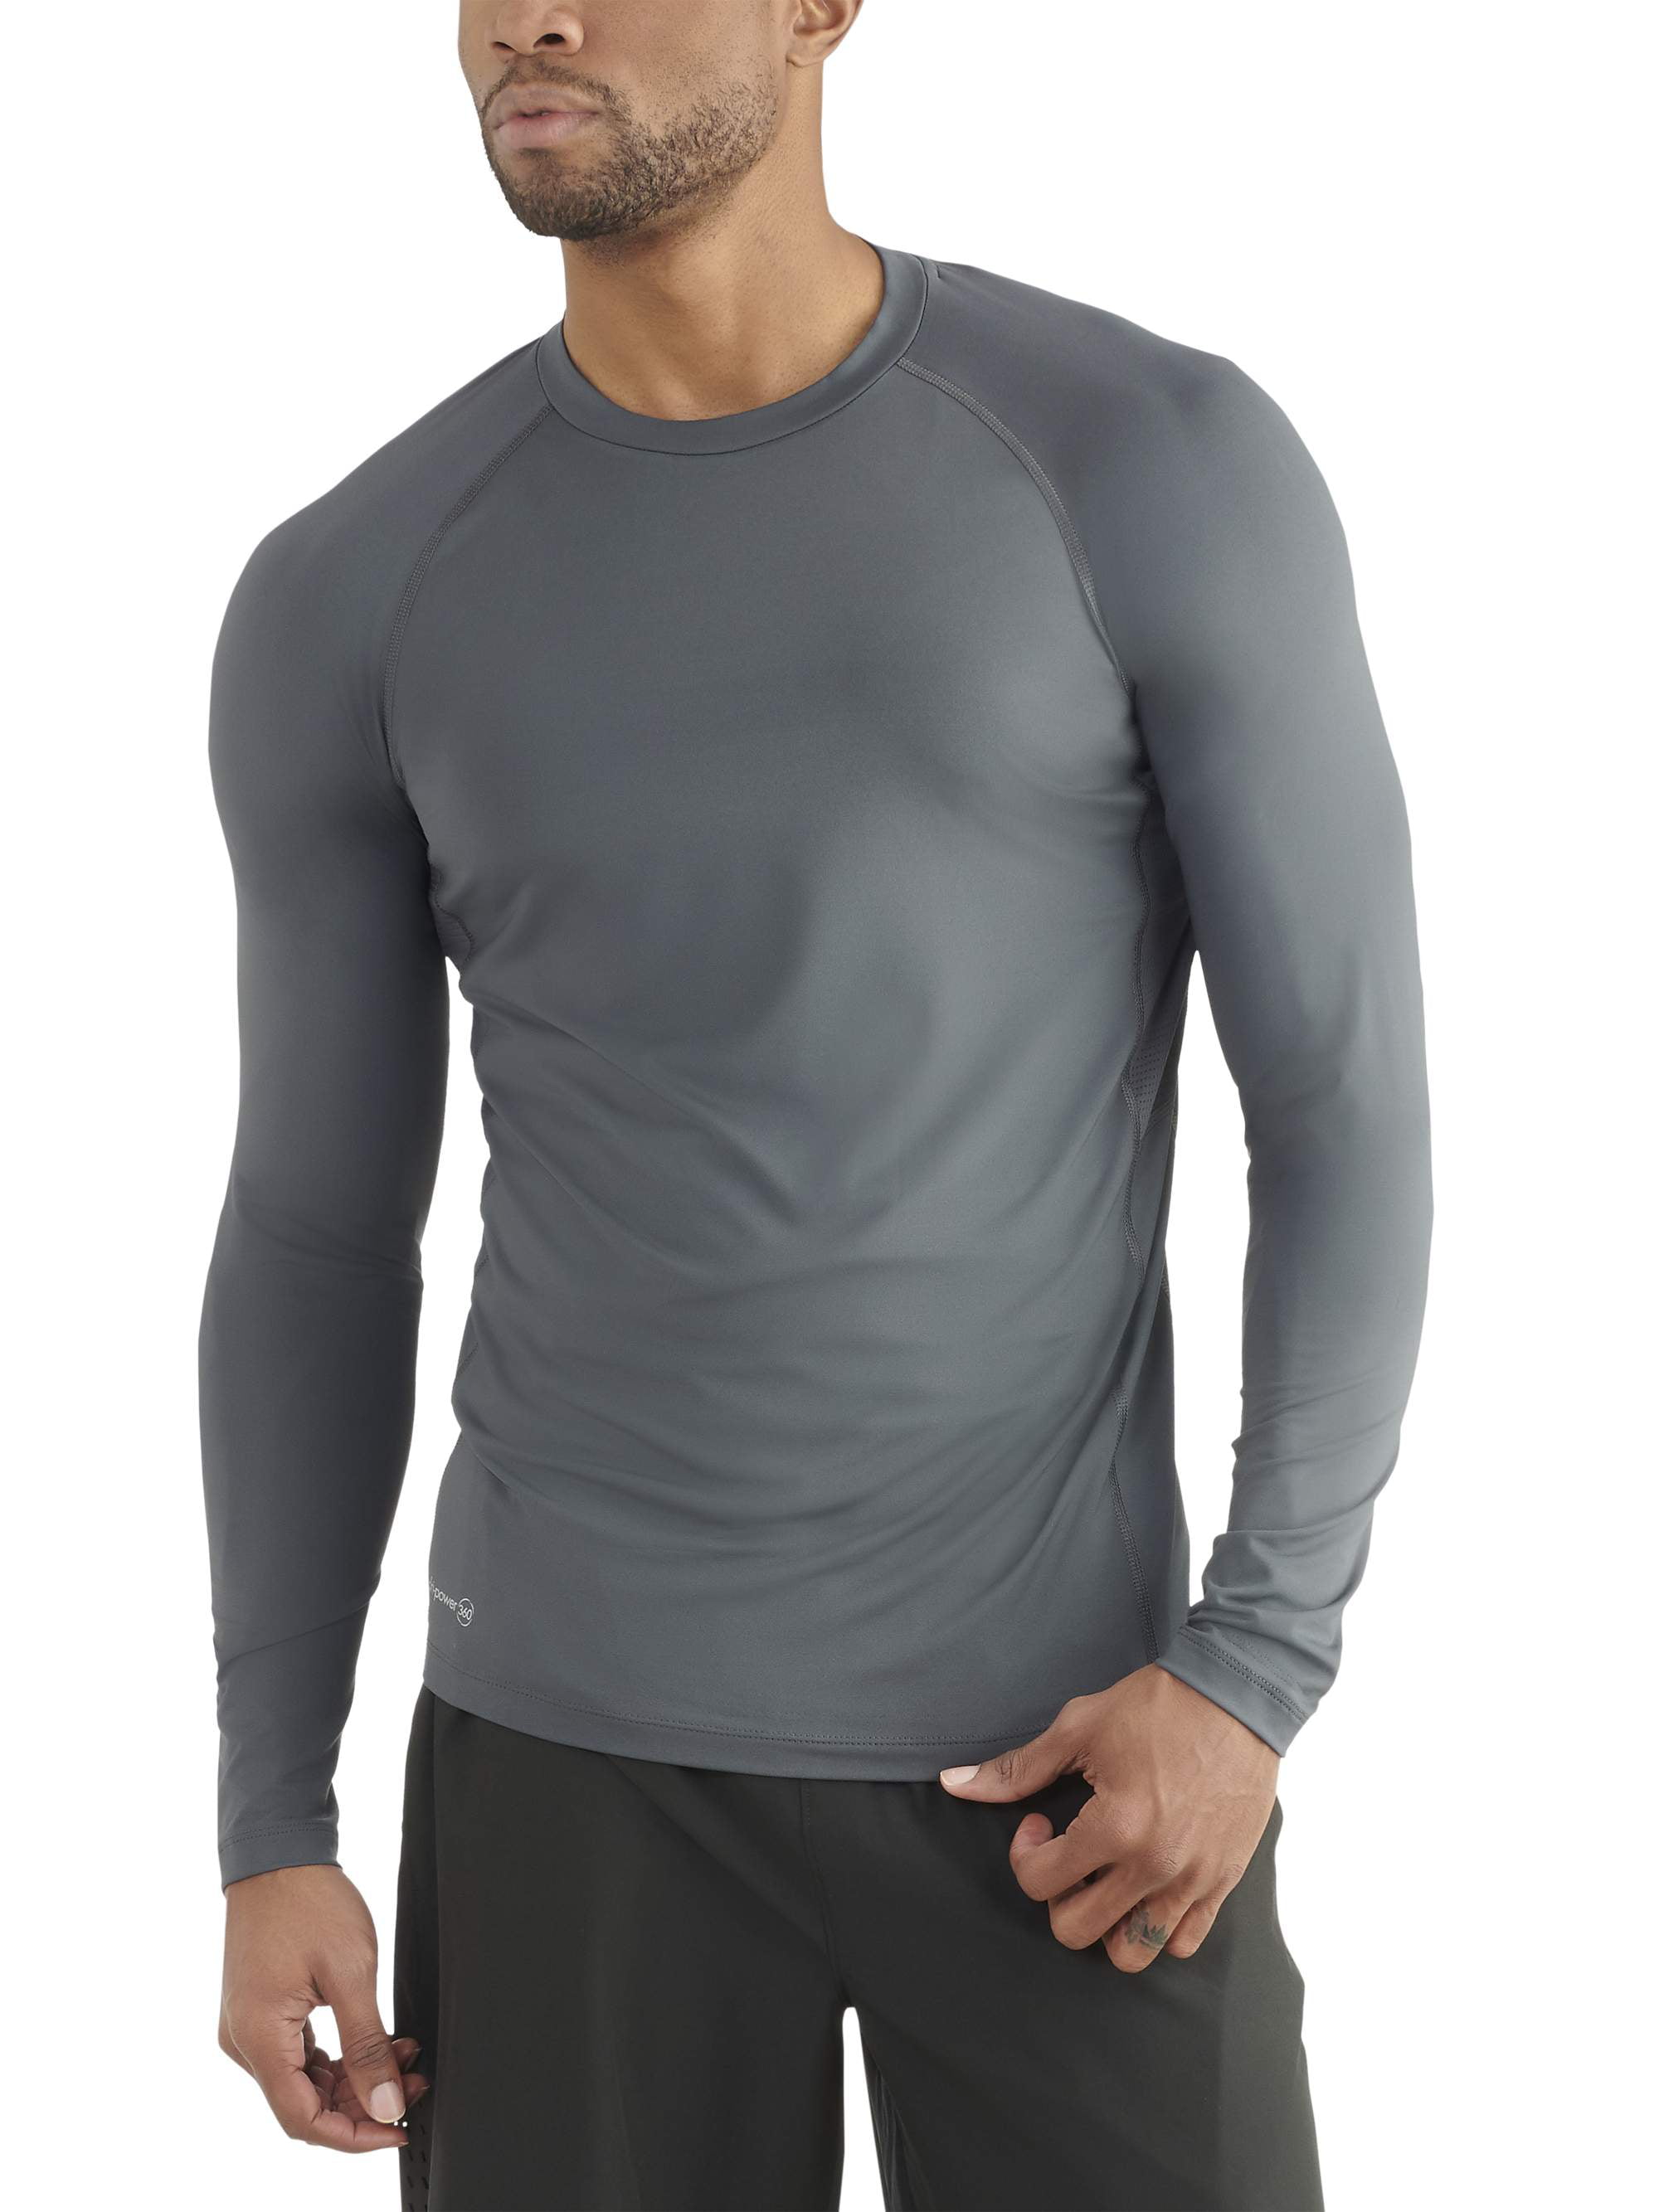 russell long sleeve compression shirt